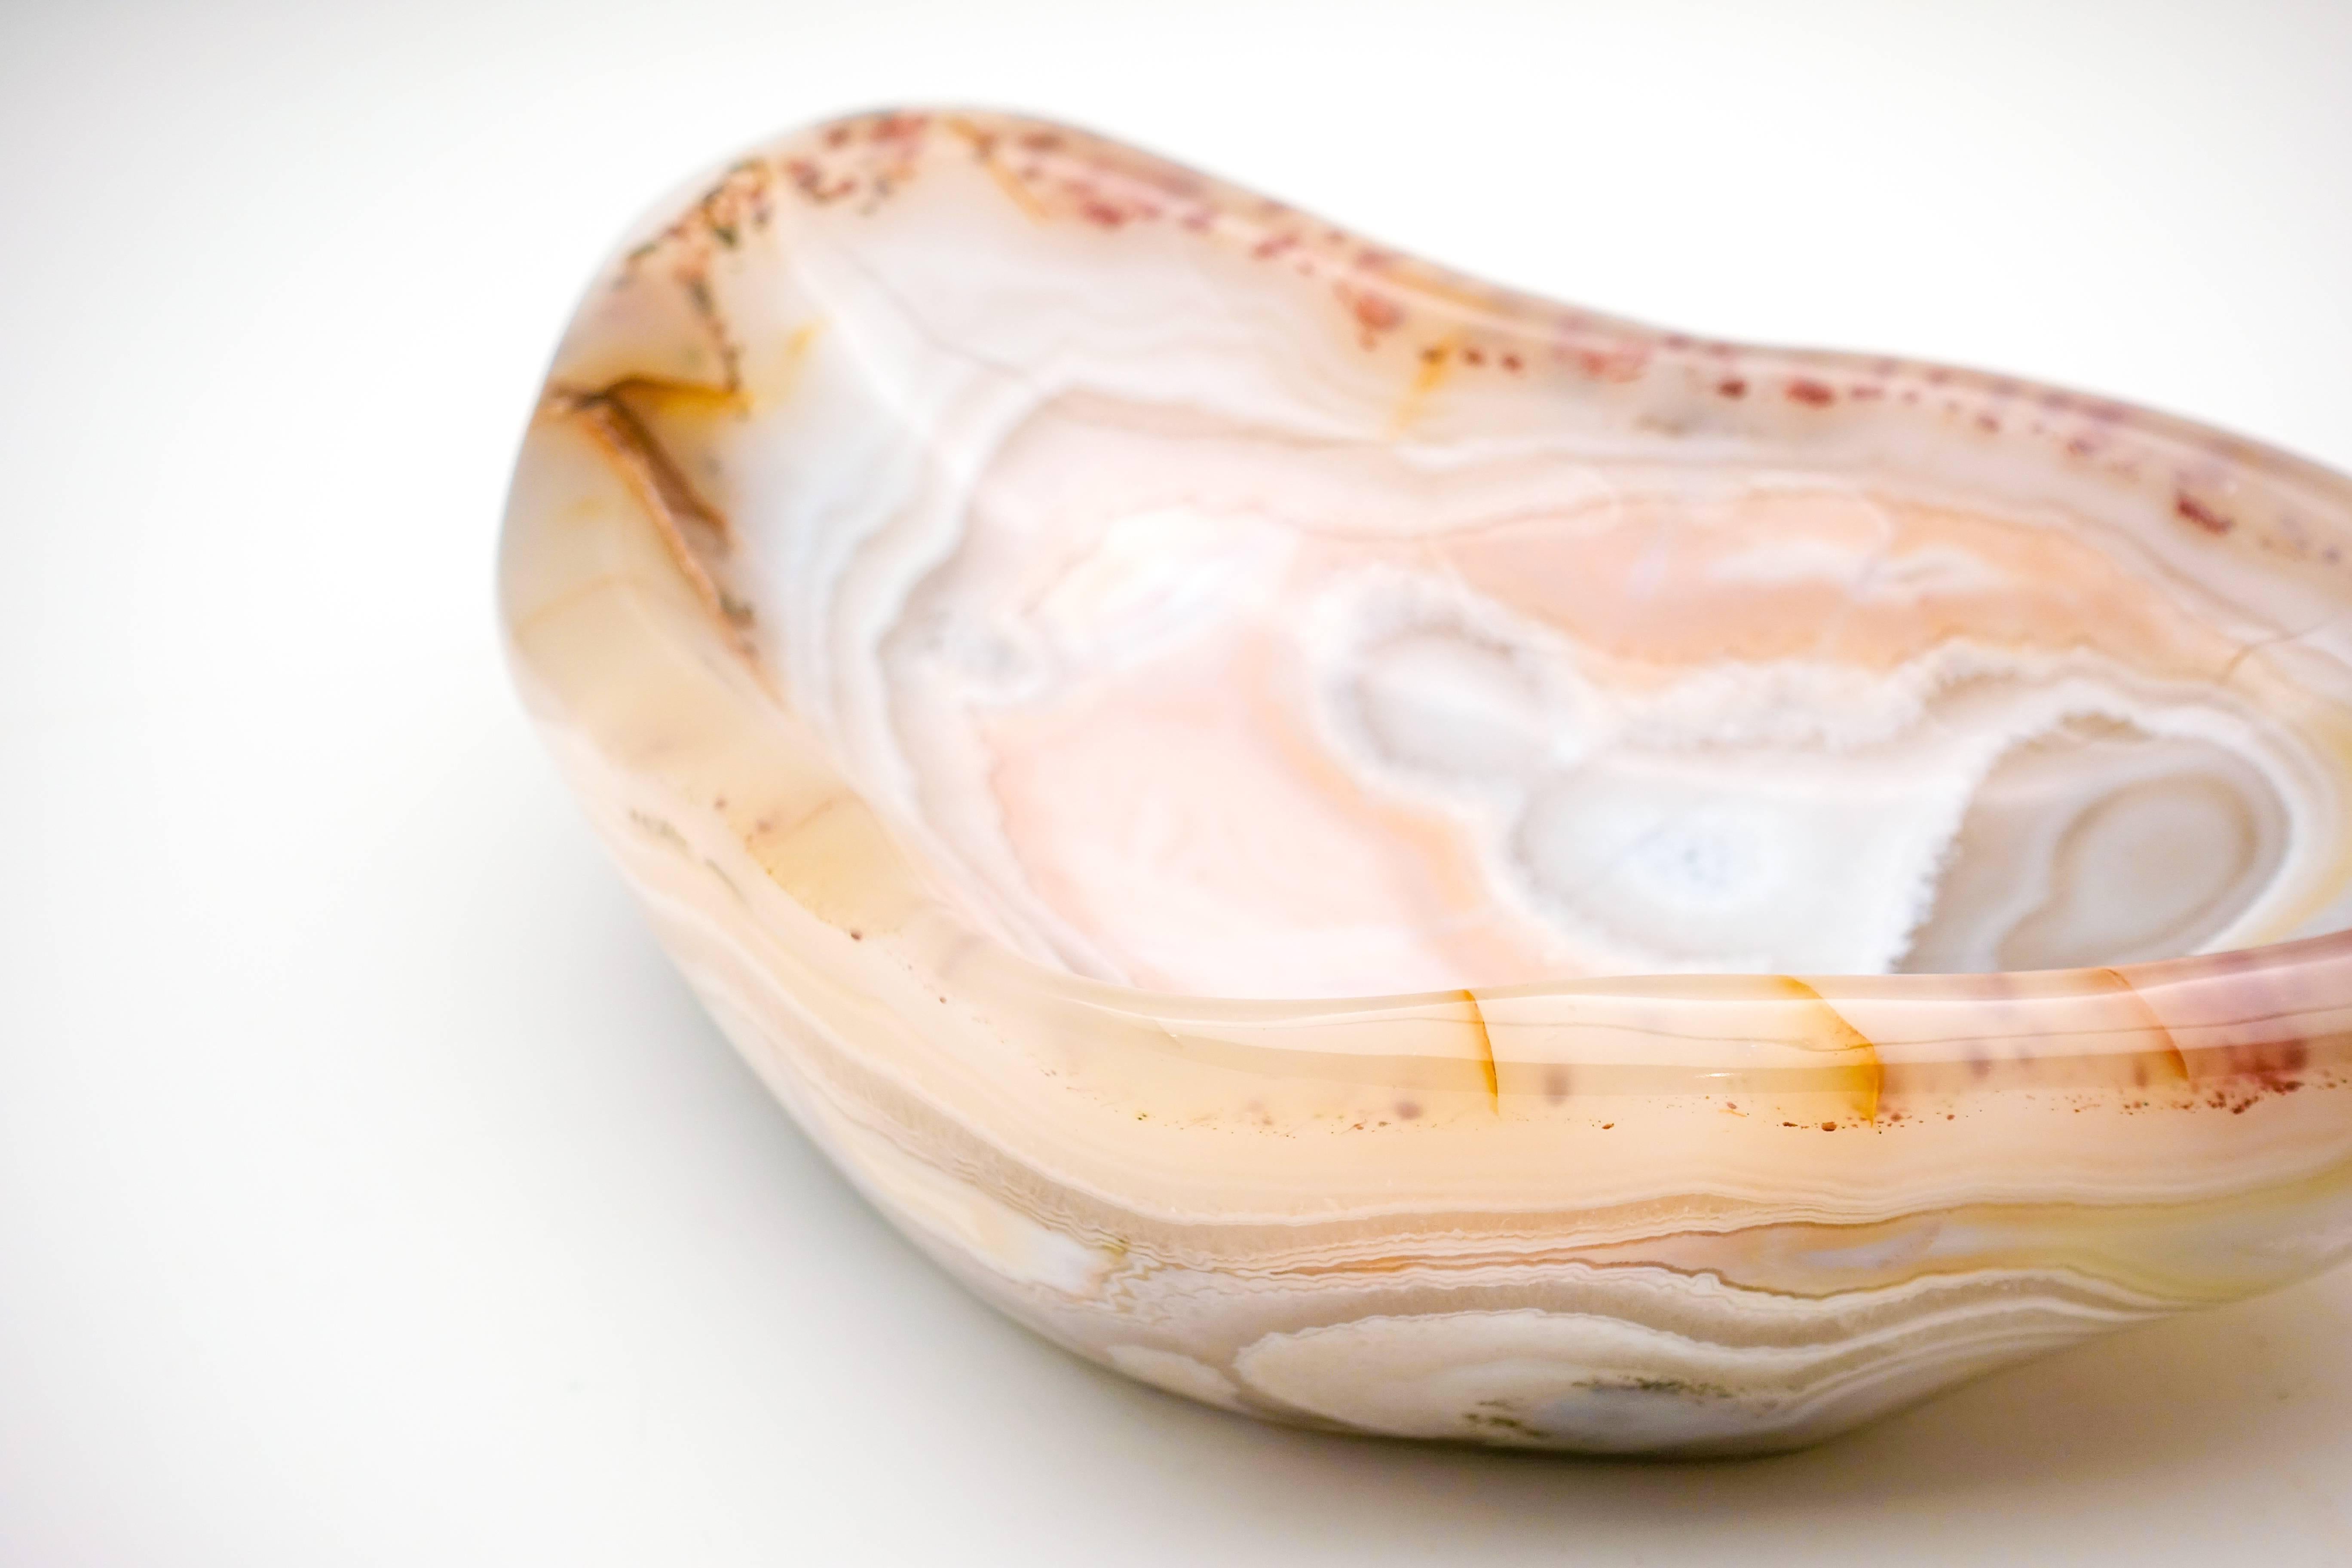 Malagasy Agate Vide Poche Bowl, Rare and Large in Size, Hand-Carved in Madagascar